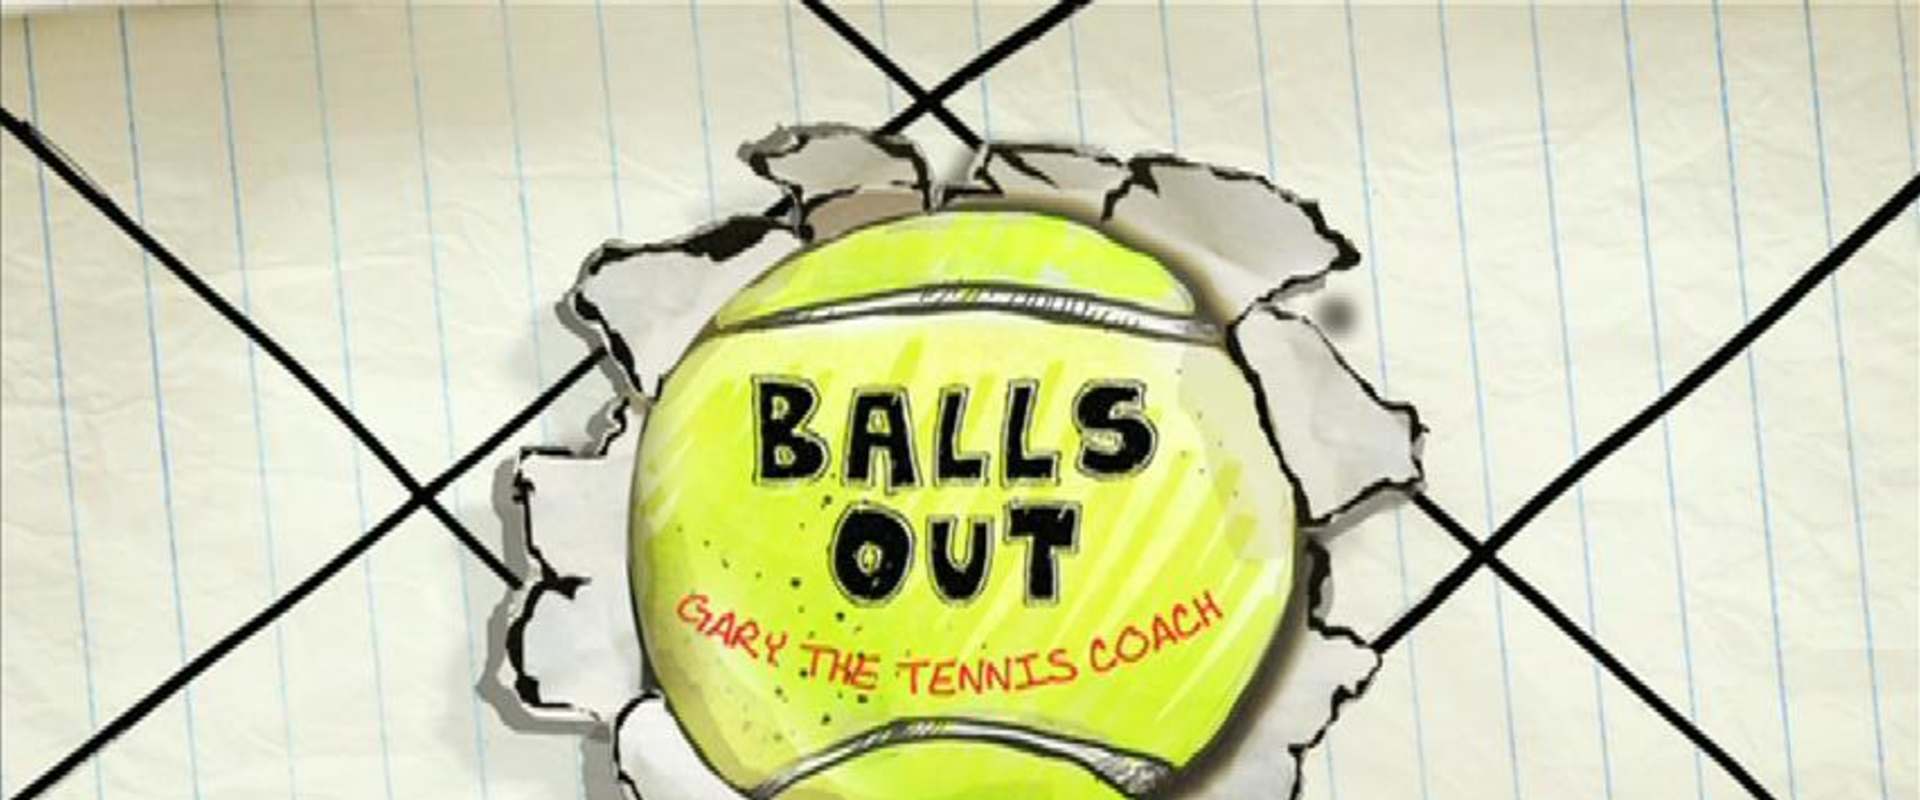 Balls Out: Gary the Tennis Coach background 1